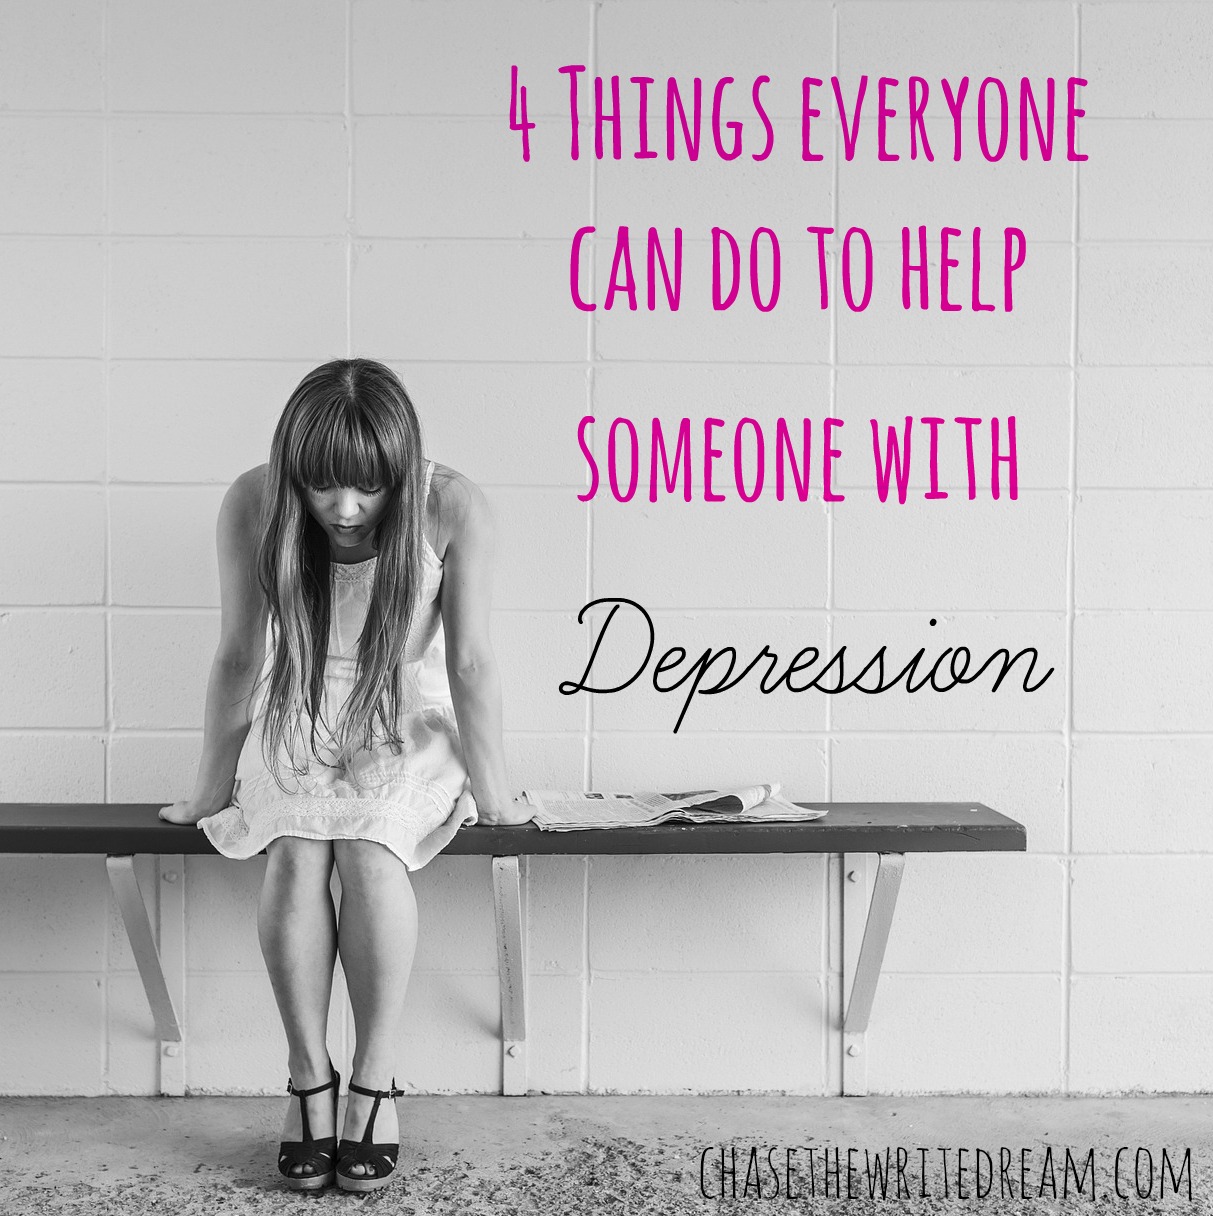 4 Things Everyone Can Do to Help Someone with Depression